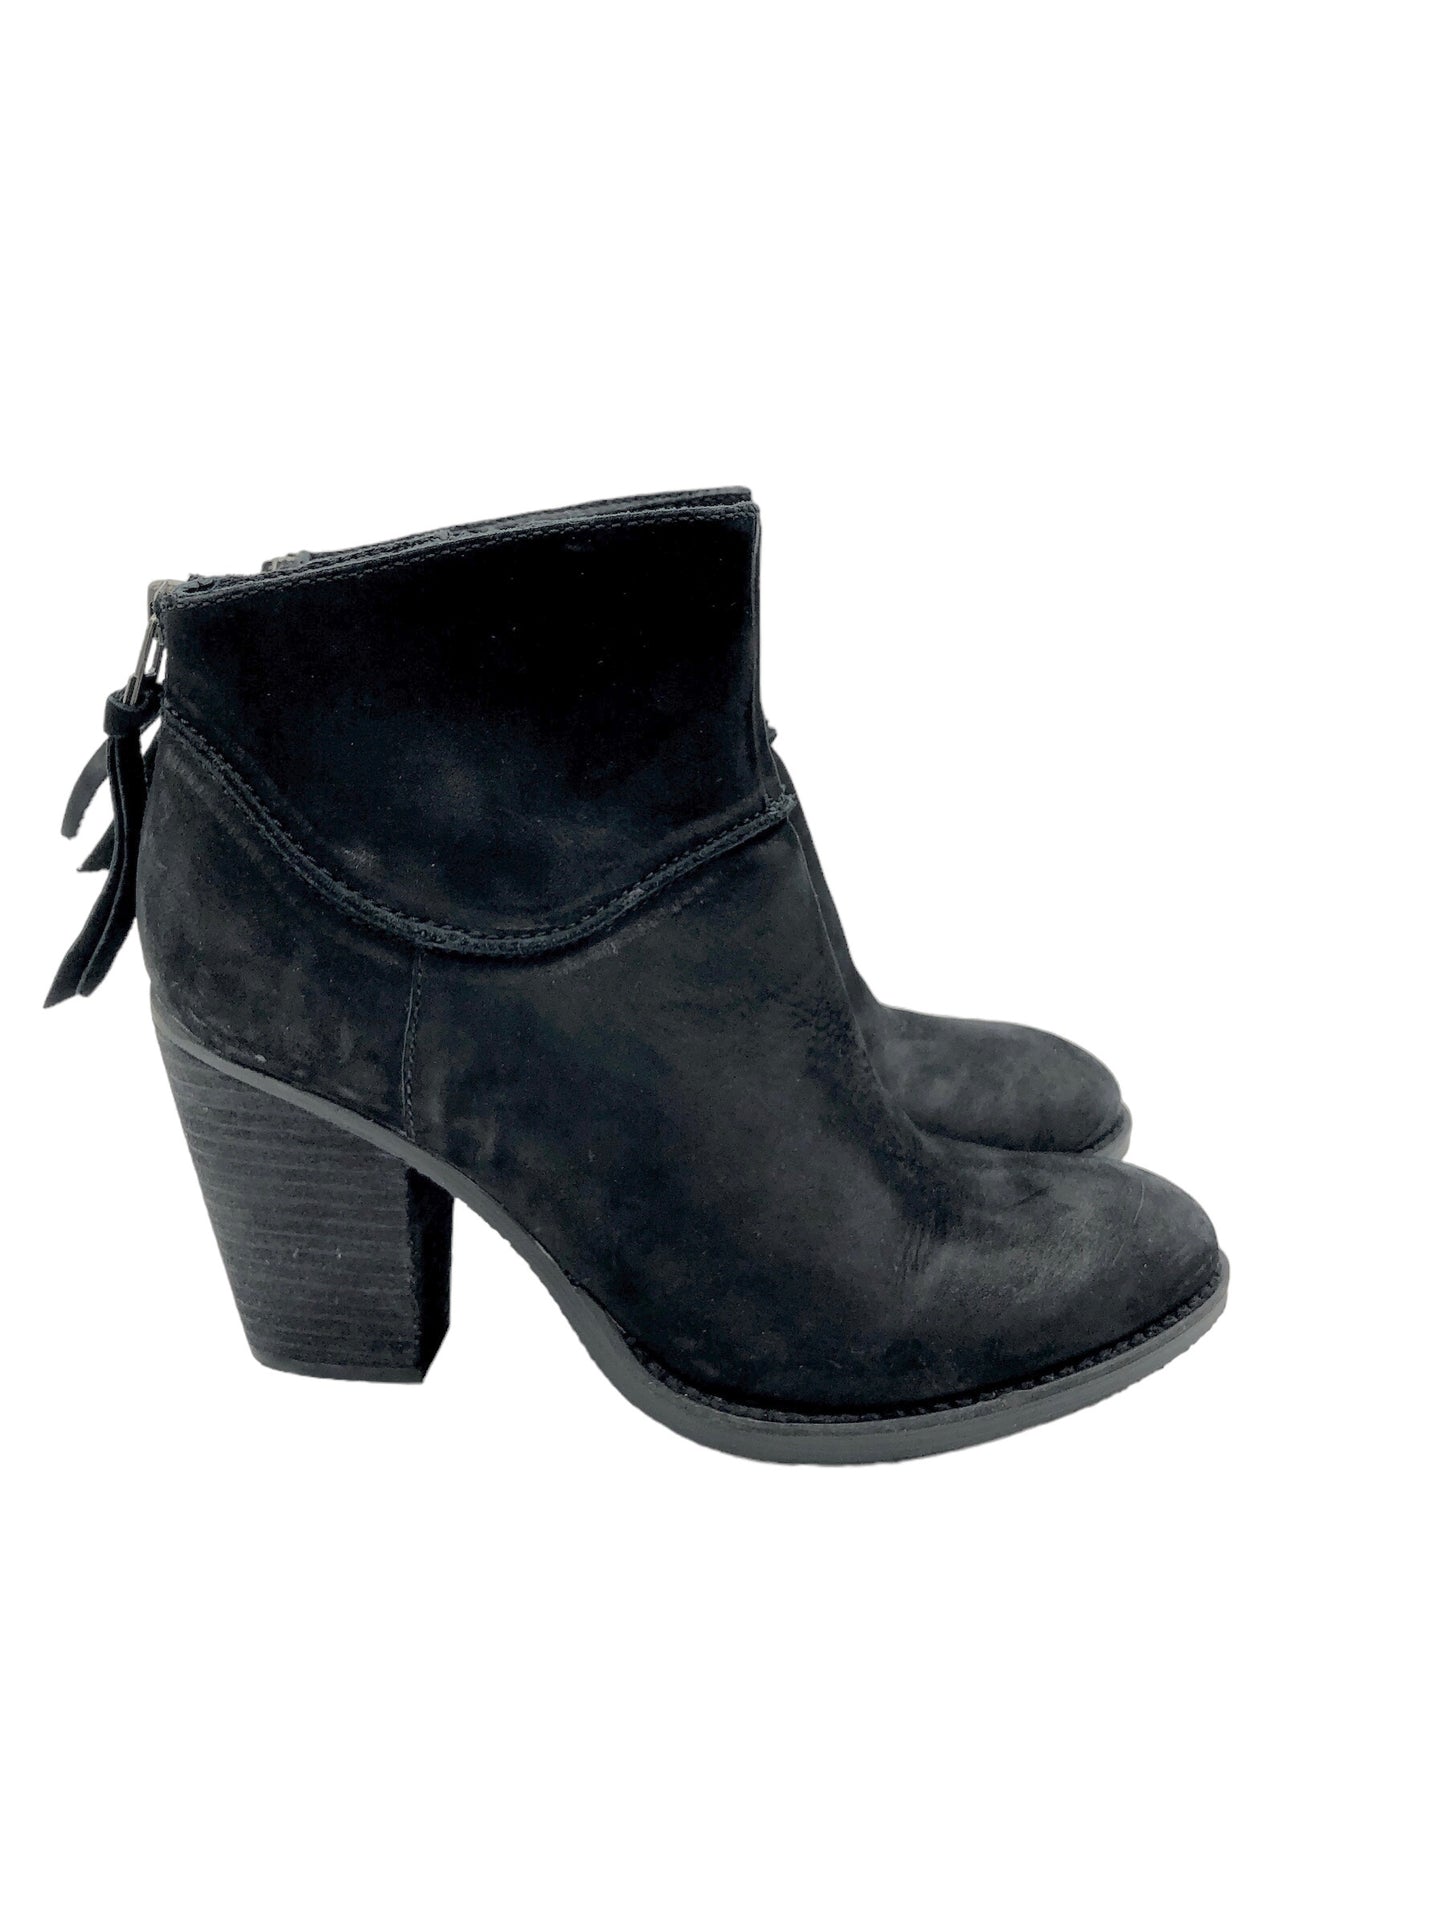 Boots Ankle Heels By Steve Madden  Size: 9.5